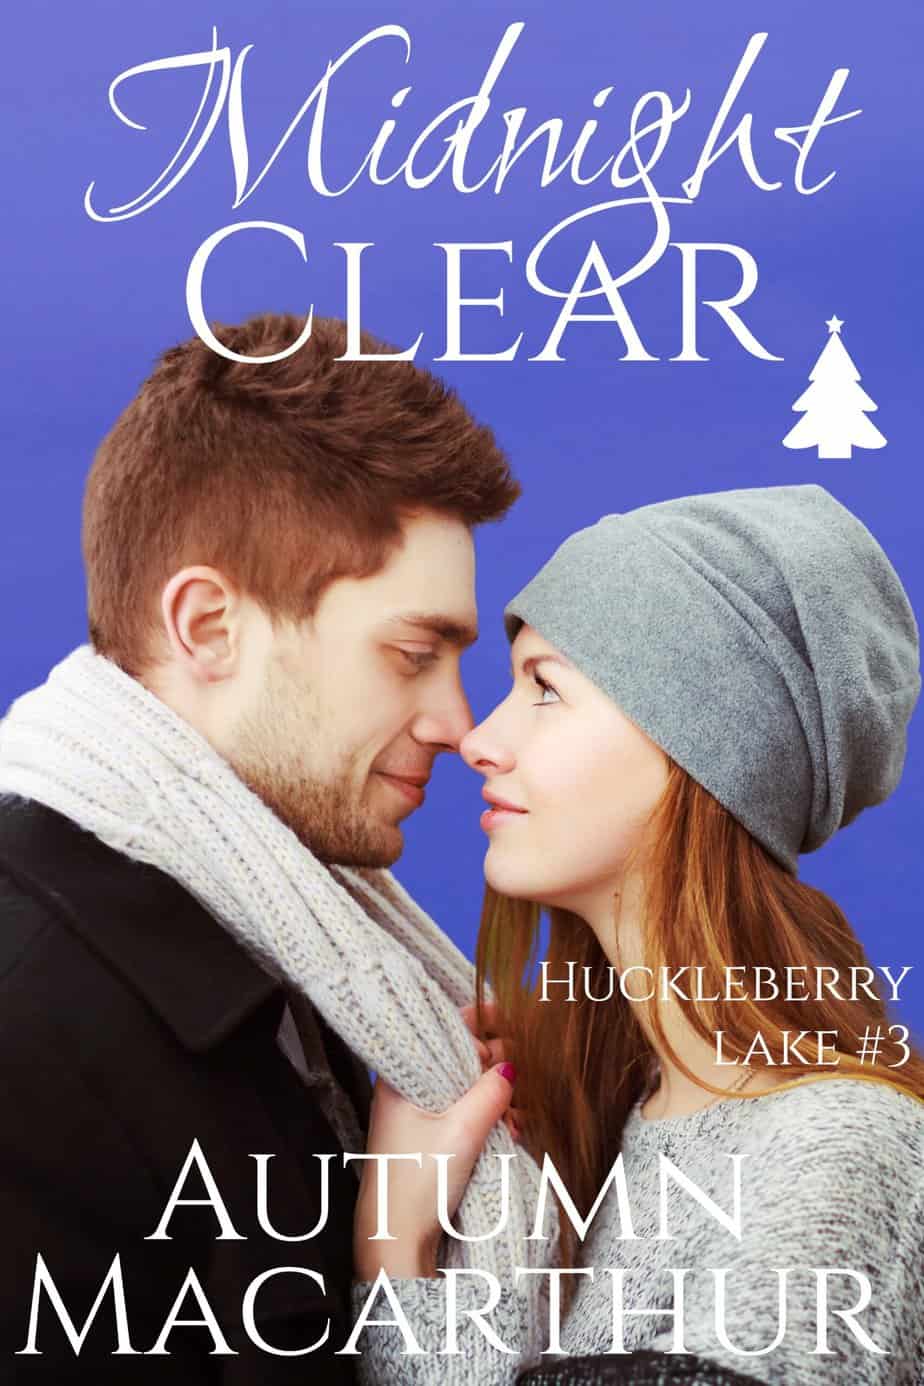 Couple nose to nose, mock-arguing, on a blue background. Cover image for Midnight Clear, a clean Christian an enemies-to-love, second chance romance